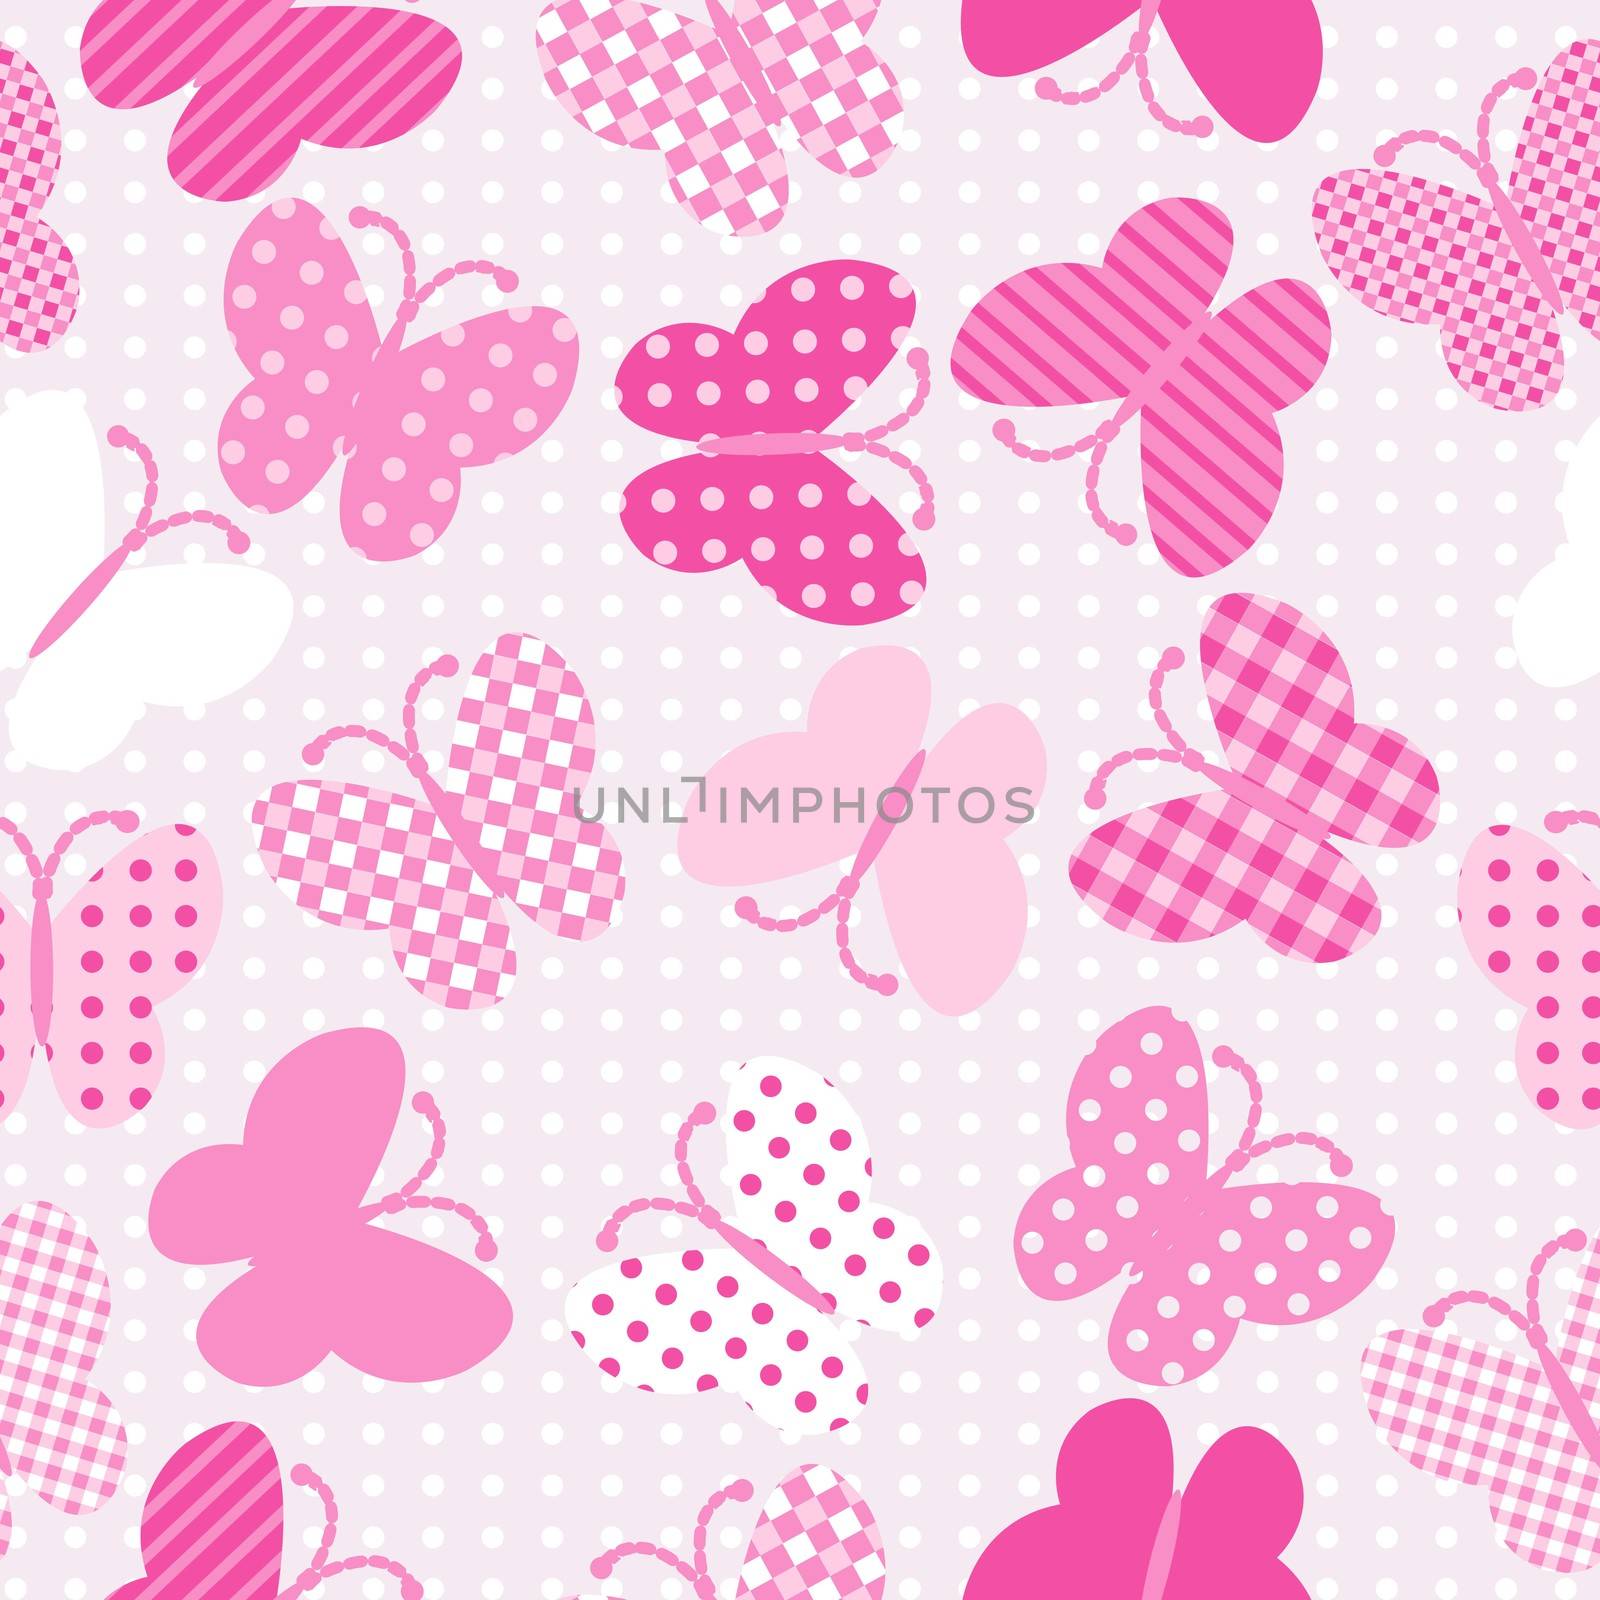 Pink patterned butterflies seamless background